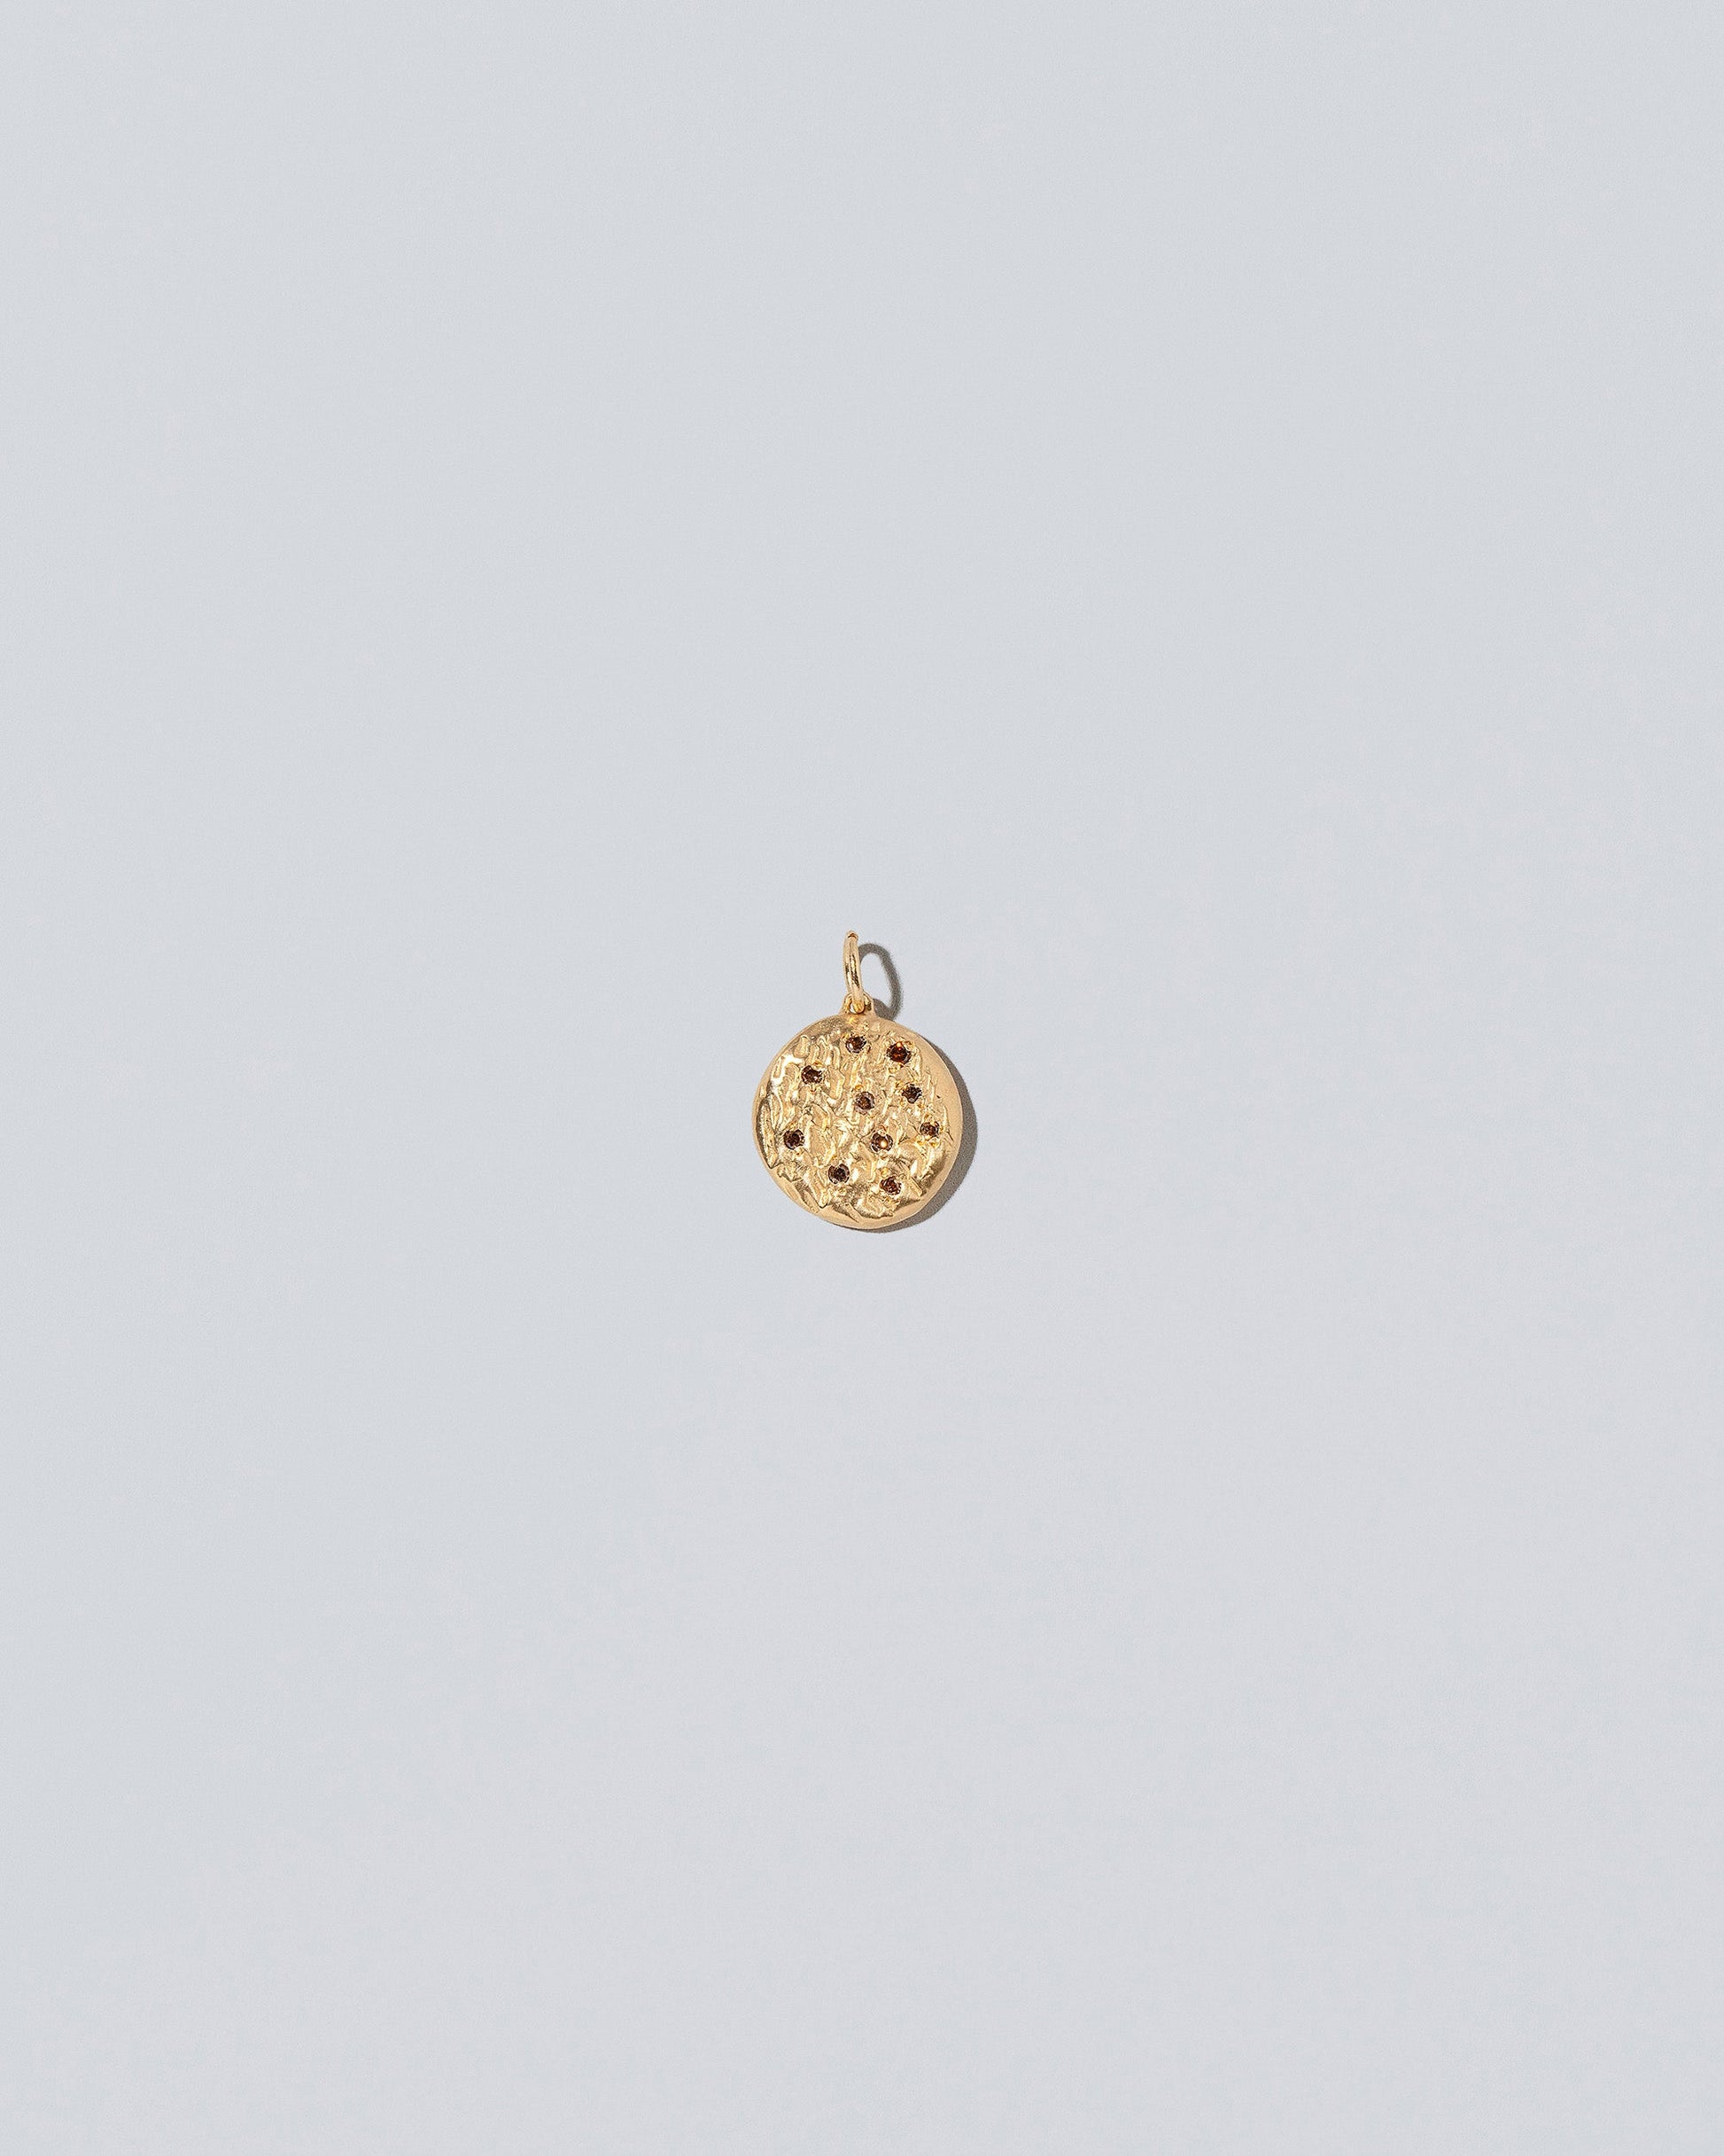  Cookie Charm - Chocolate Chips on light color background.